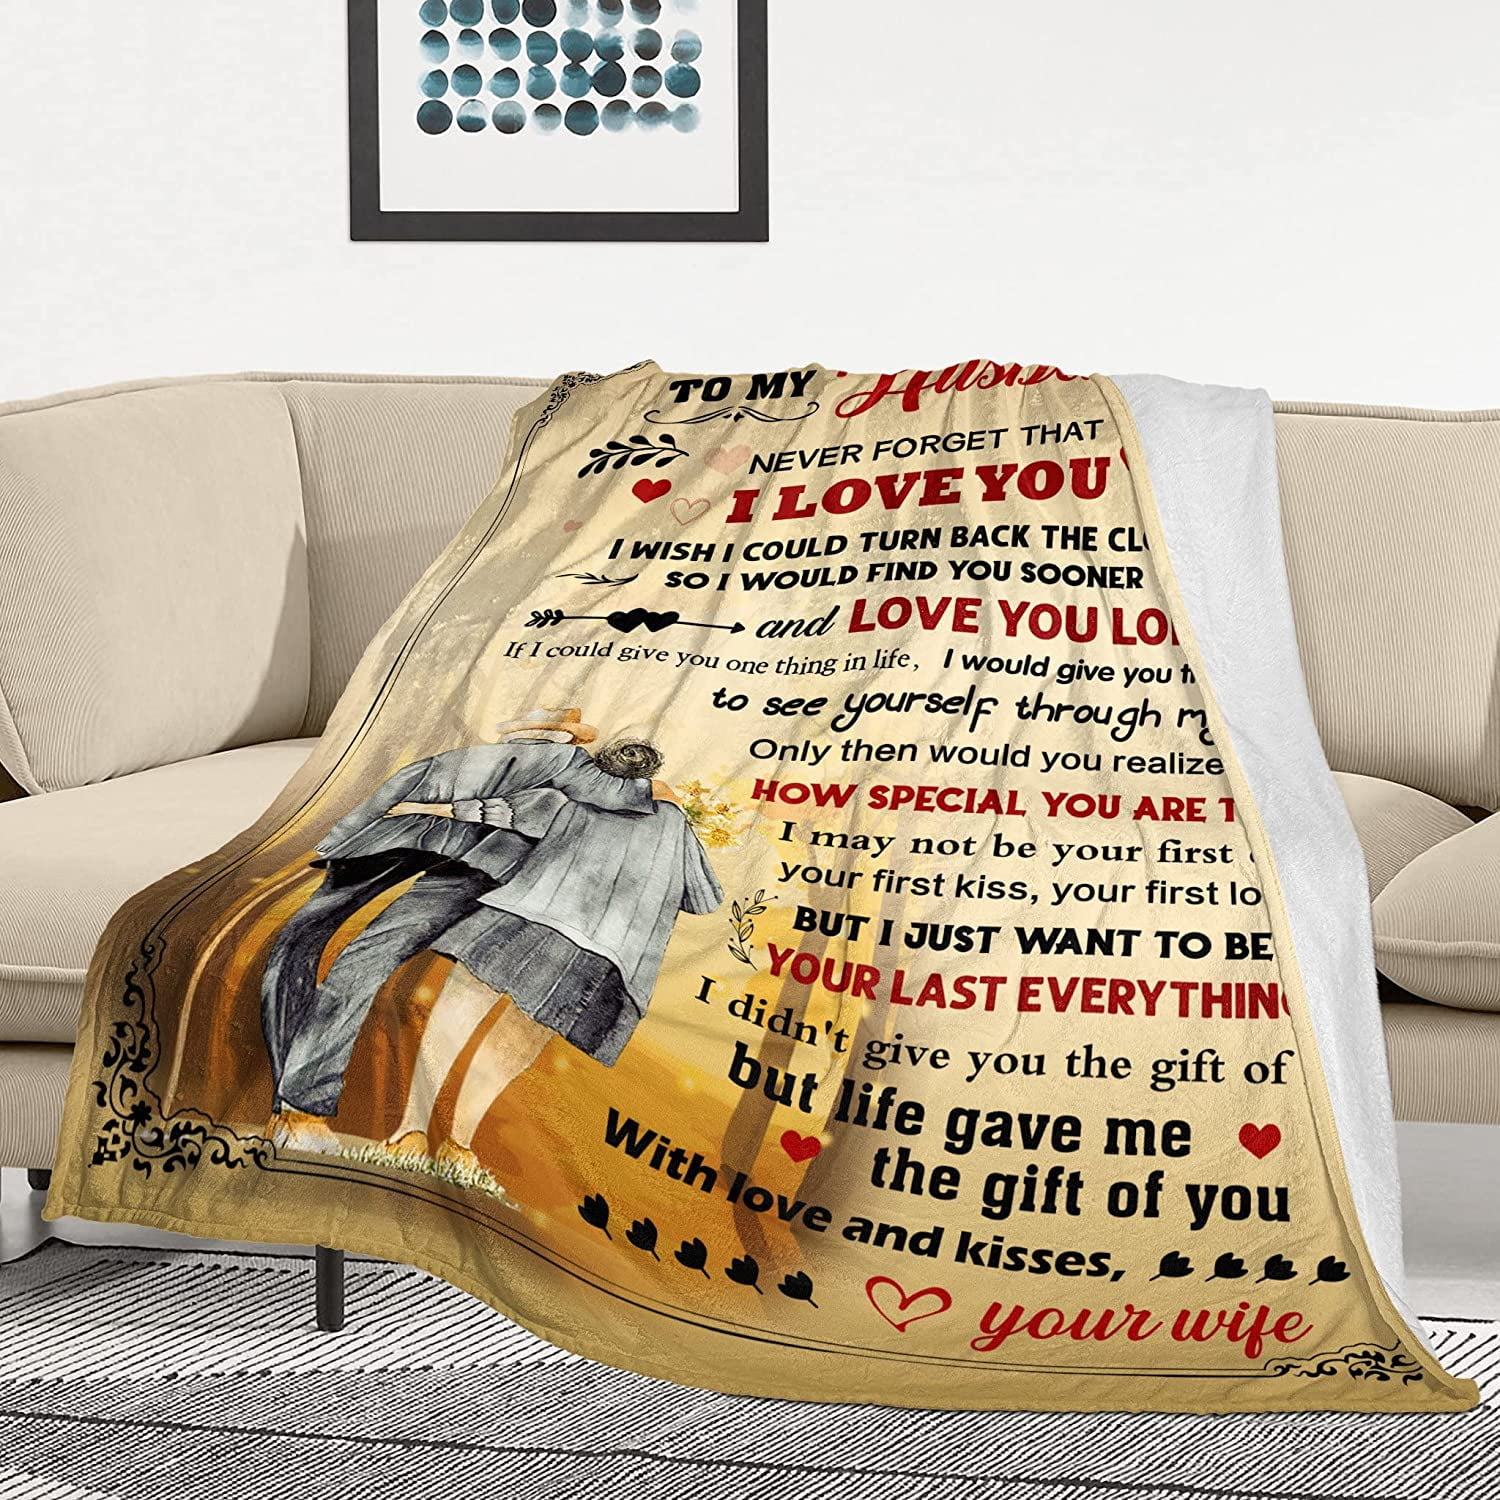  TURMTF Custom Blanket Birthday Gifts for Wife, Wedding  Anniversary Romantic Gifts for Wife, Wife Gifts from Husband, Gifts for  Her, Wife Blanket 50x60 : Home & Kitchen